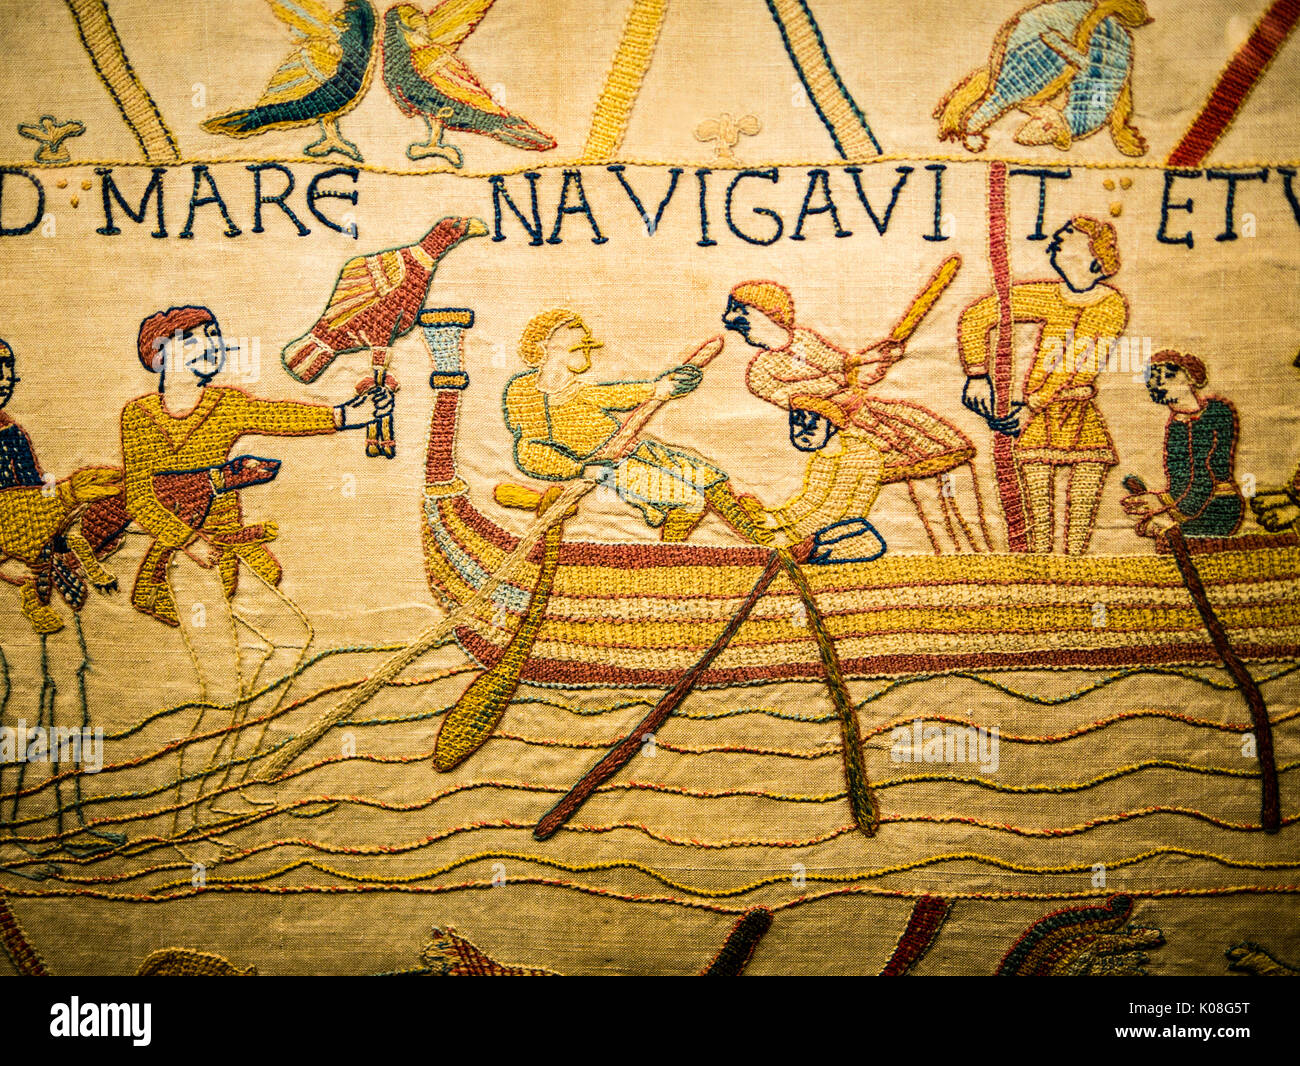 Bayeux Tapestry, Reading Museum, Reading Town Hall, Reading, Berkshire, England, UK, GB. Stock Photo